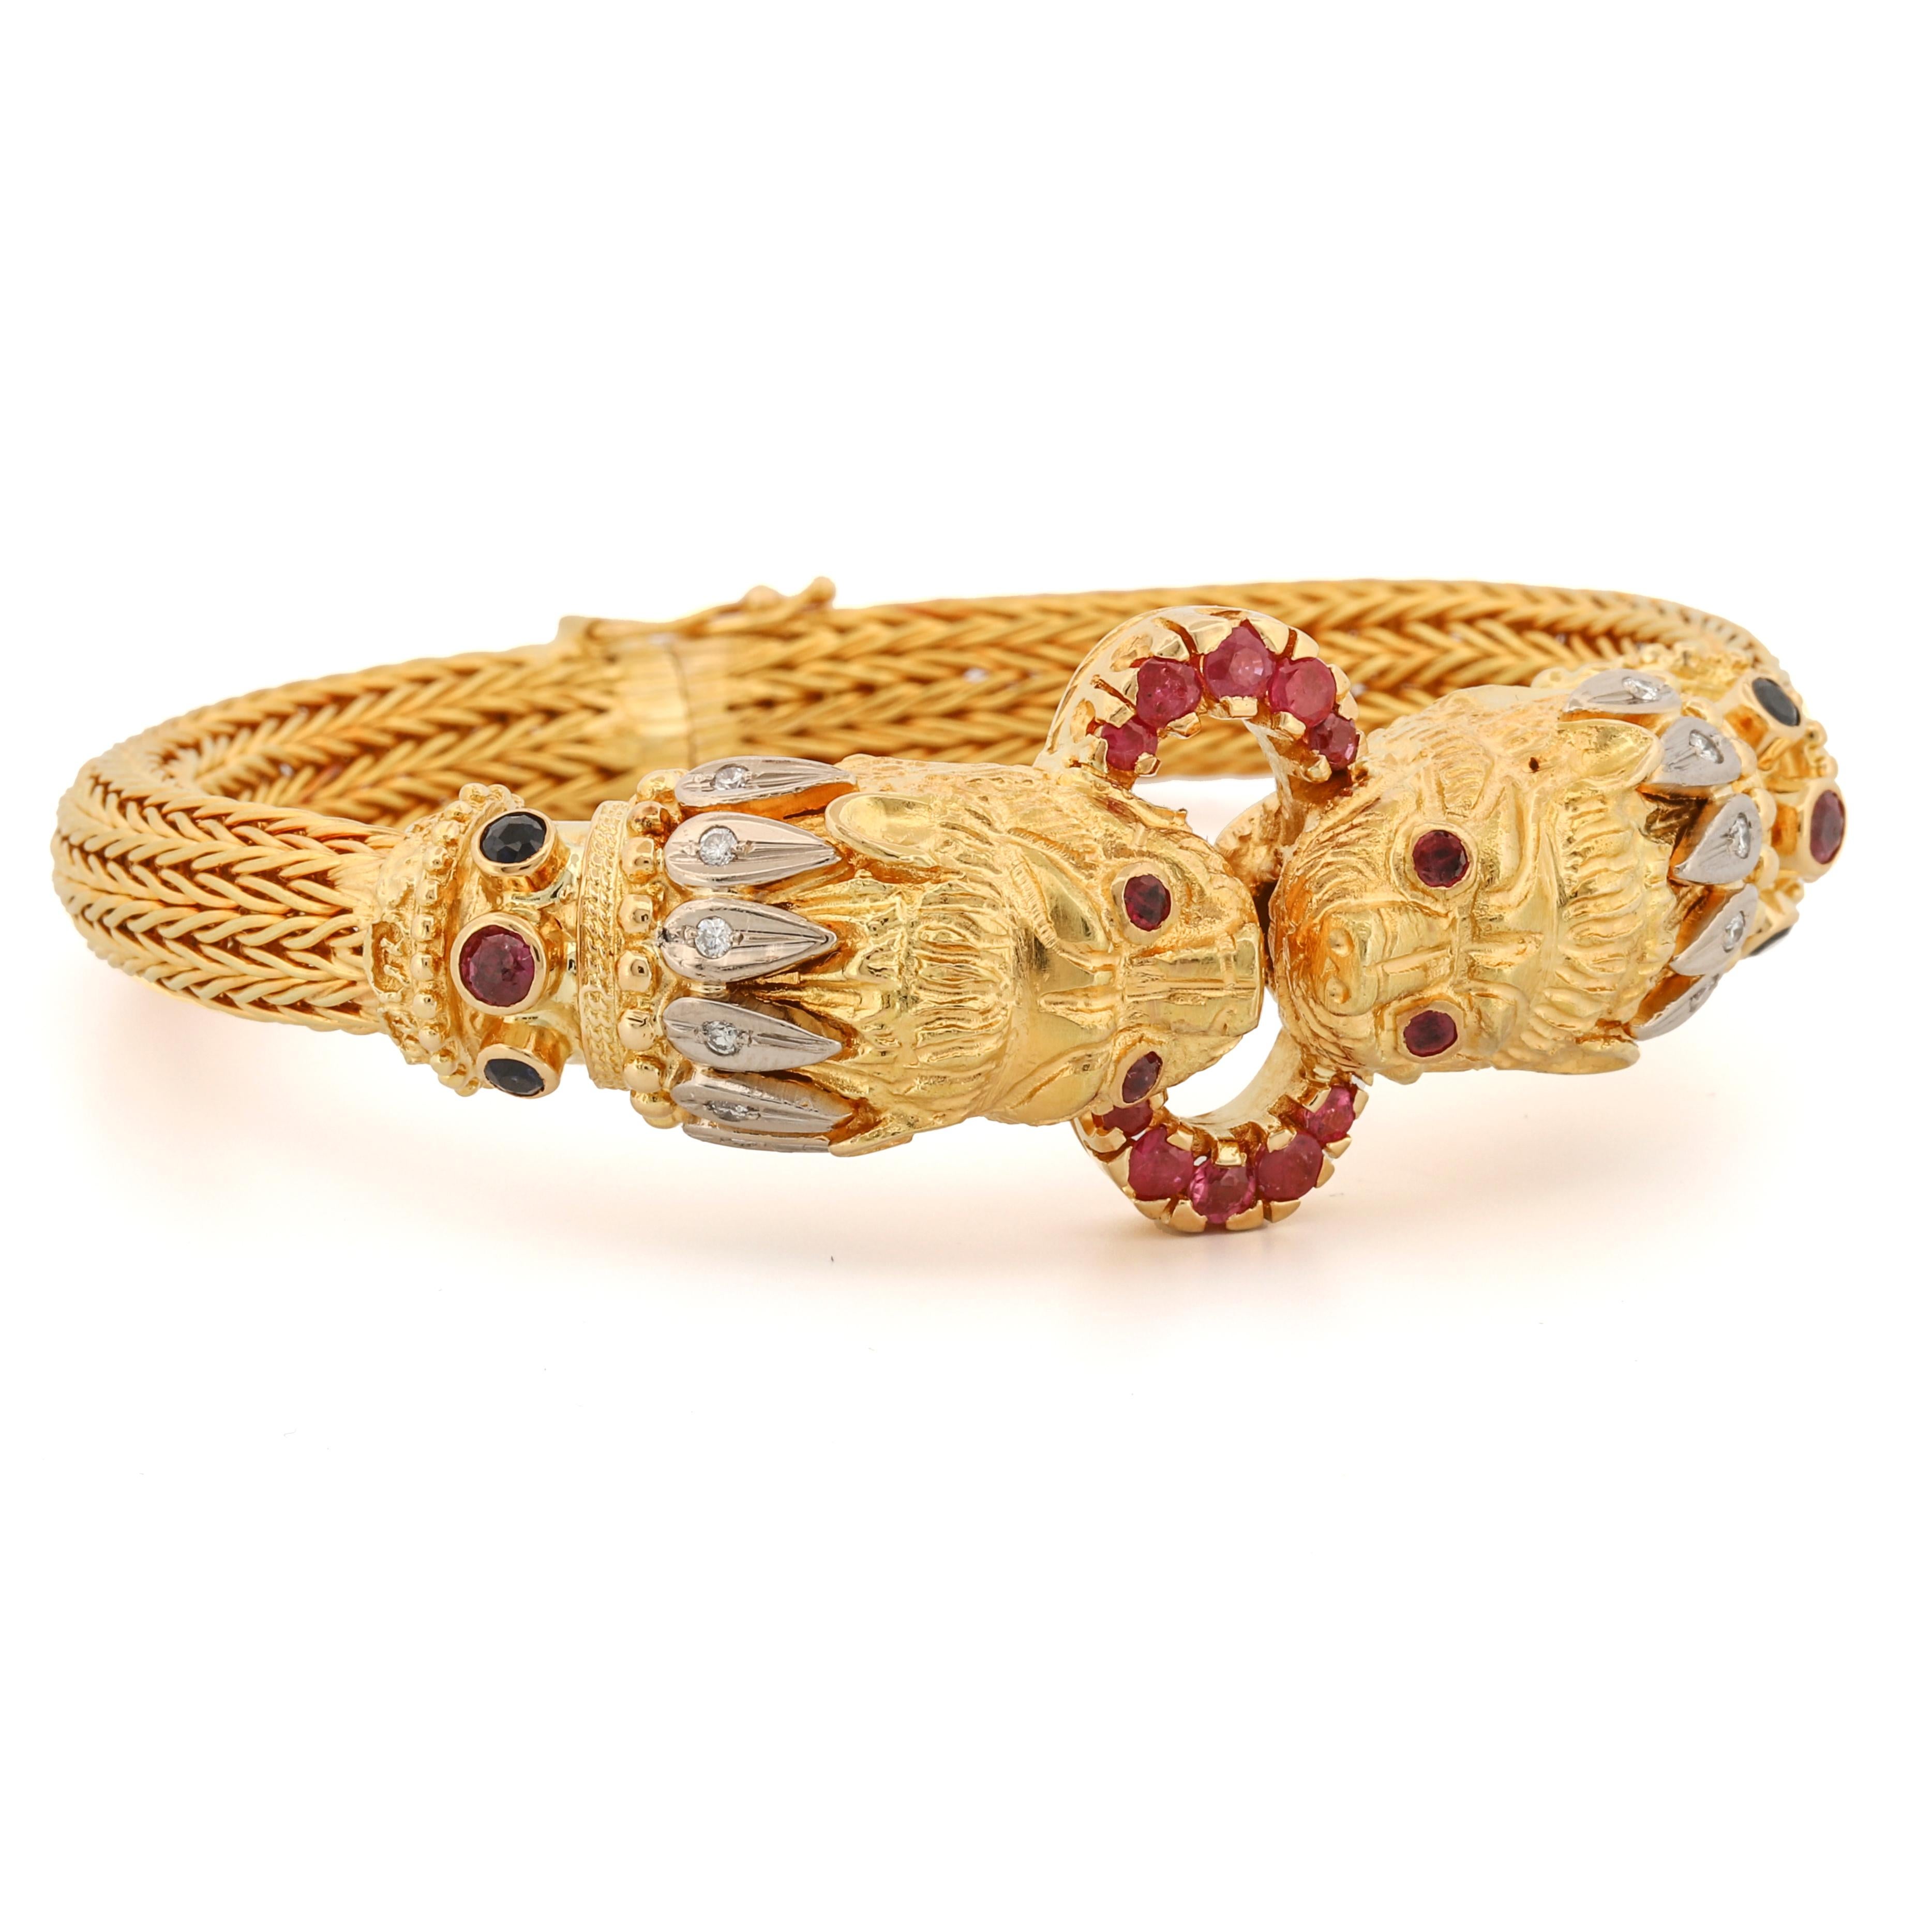 Elevate your jewelry collection with the exquisite Lalaounis Double Lion Head Bracelet. Handcrafted in Greece, this 18k gold masterpiece showcases a unique and bold mythological design. This piece is a true statement of luxury, featuring dazzling